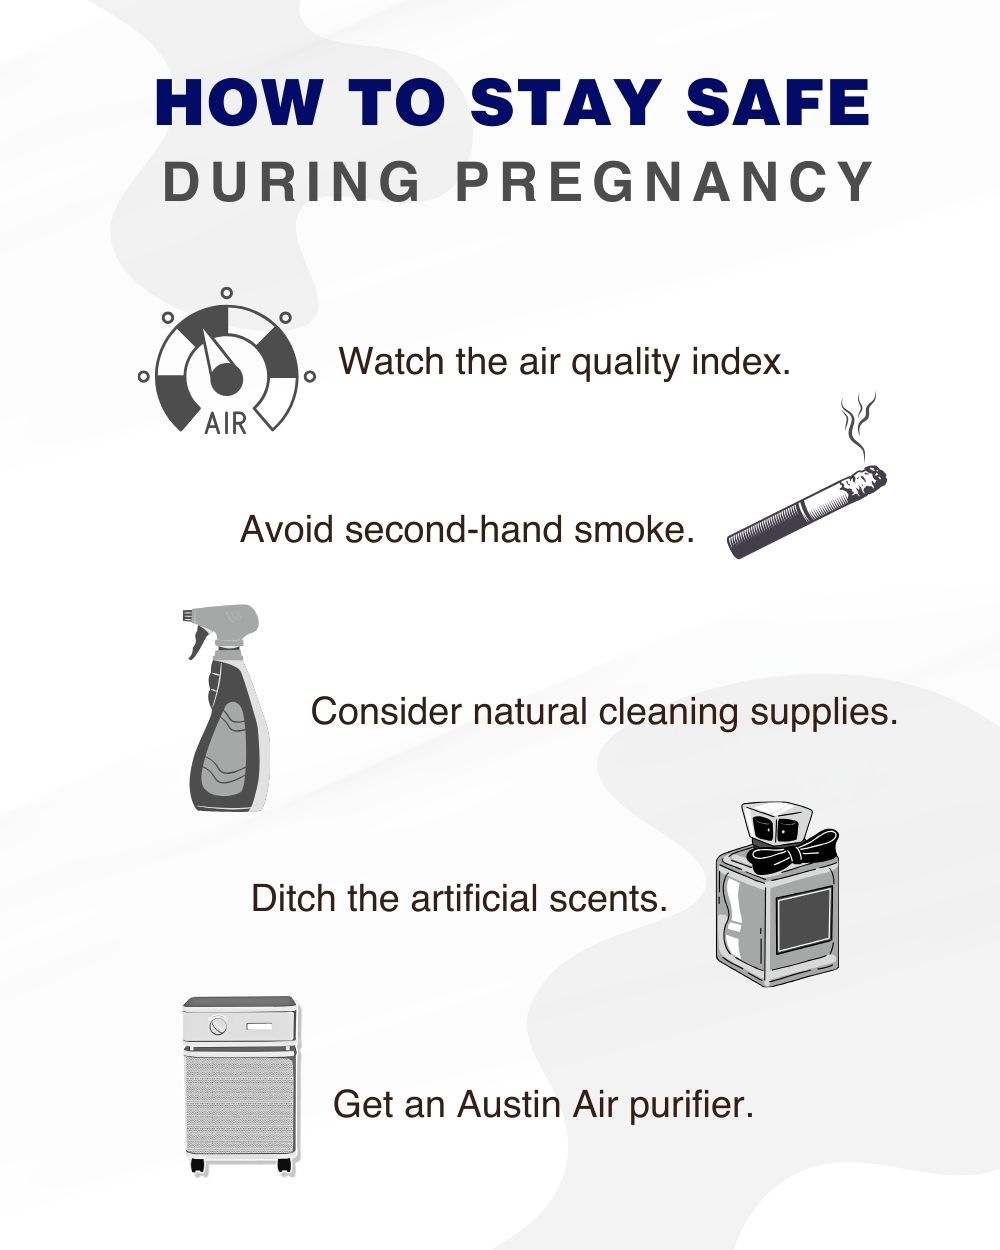 Infographic on how to avoid airborne contaminants during pregnancy which include: check the Air Quality Index, avoid secondhand smoke/vaping, consider natural cleaning products, ditch artificial scents, and use an Austin Air cleaner.